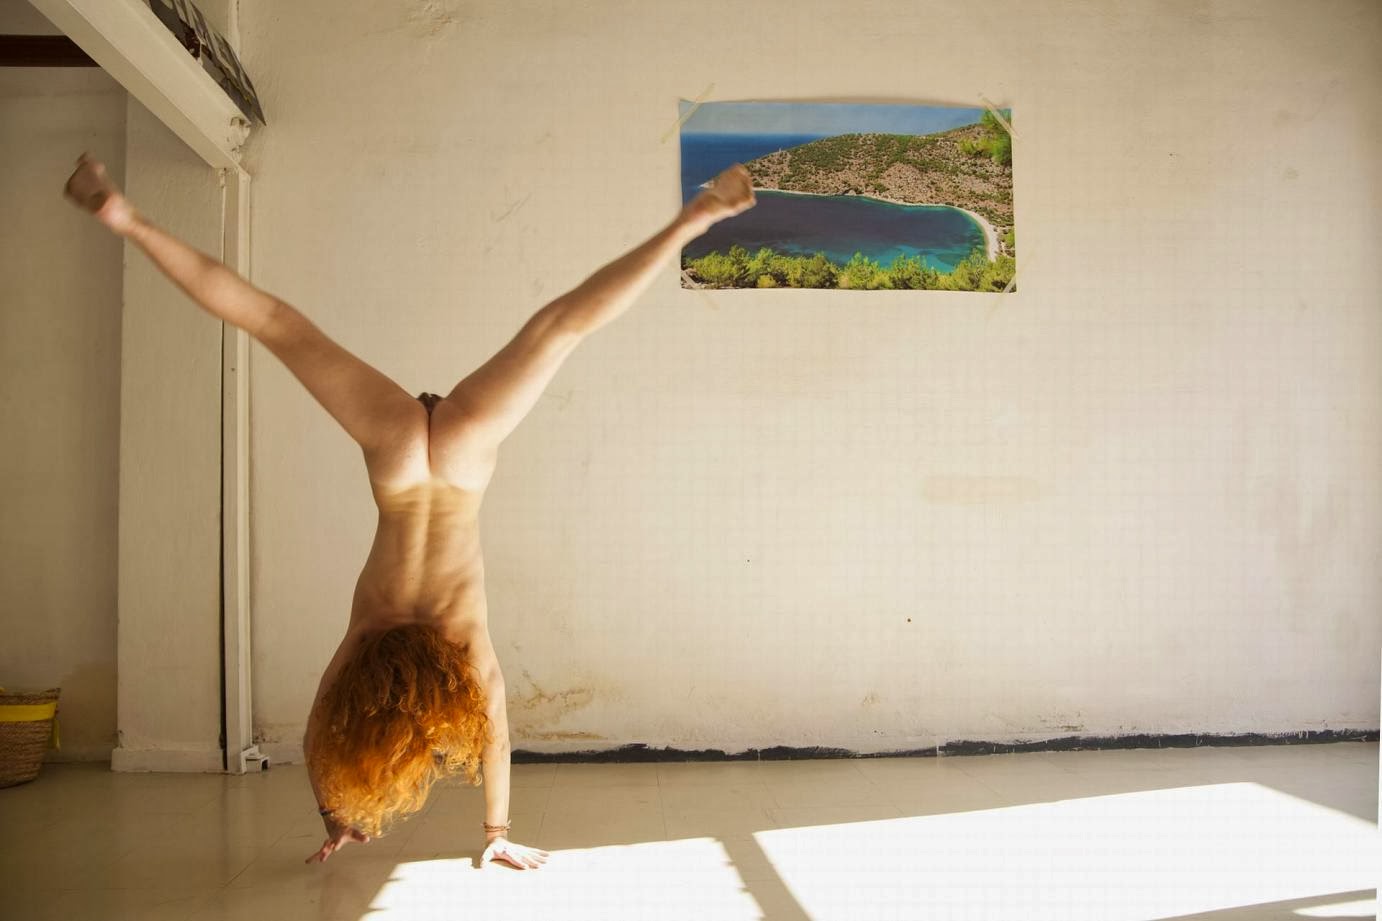 Naked Big Breasted Woman Doing Handstand.